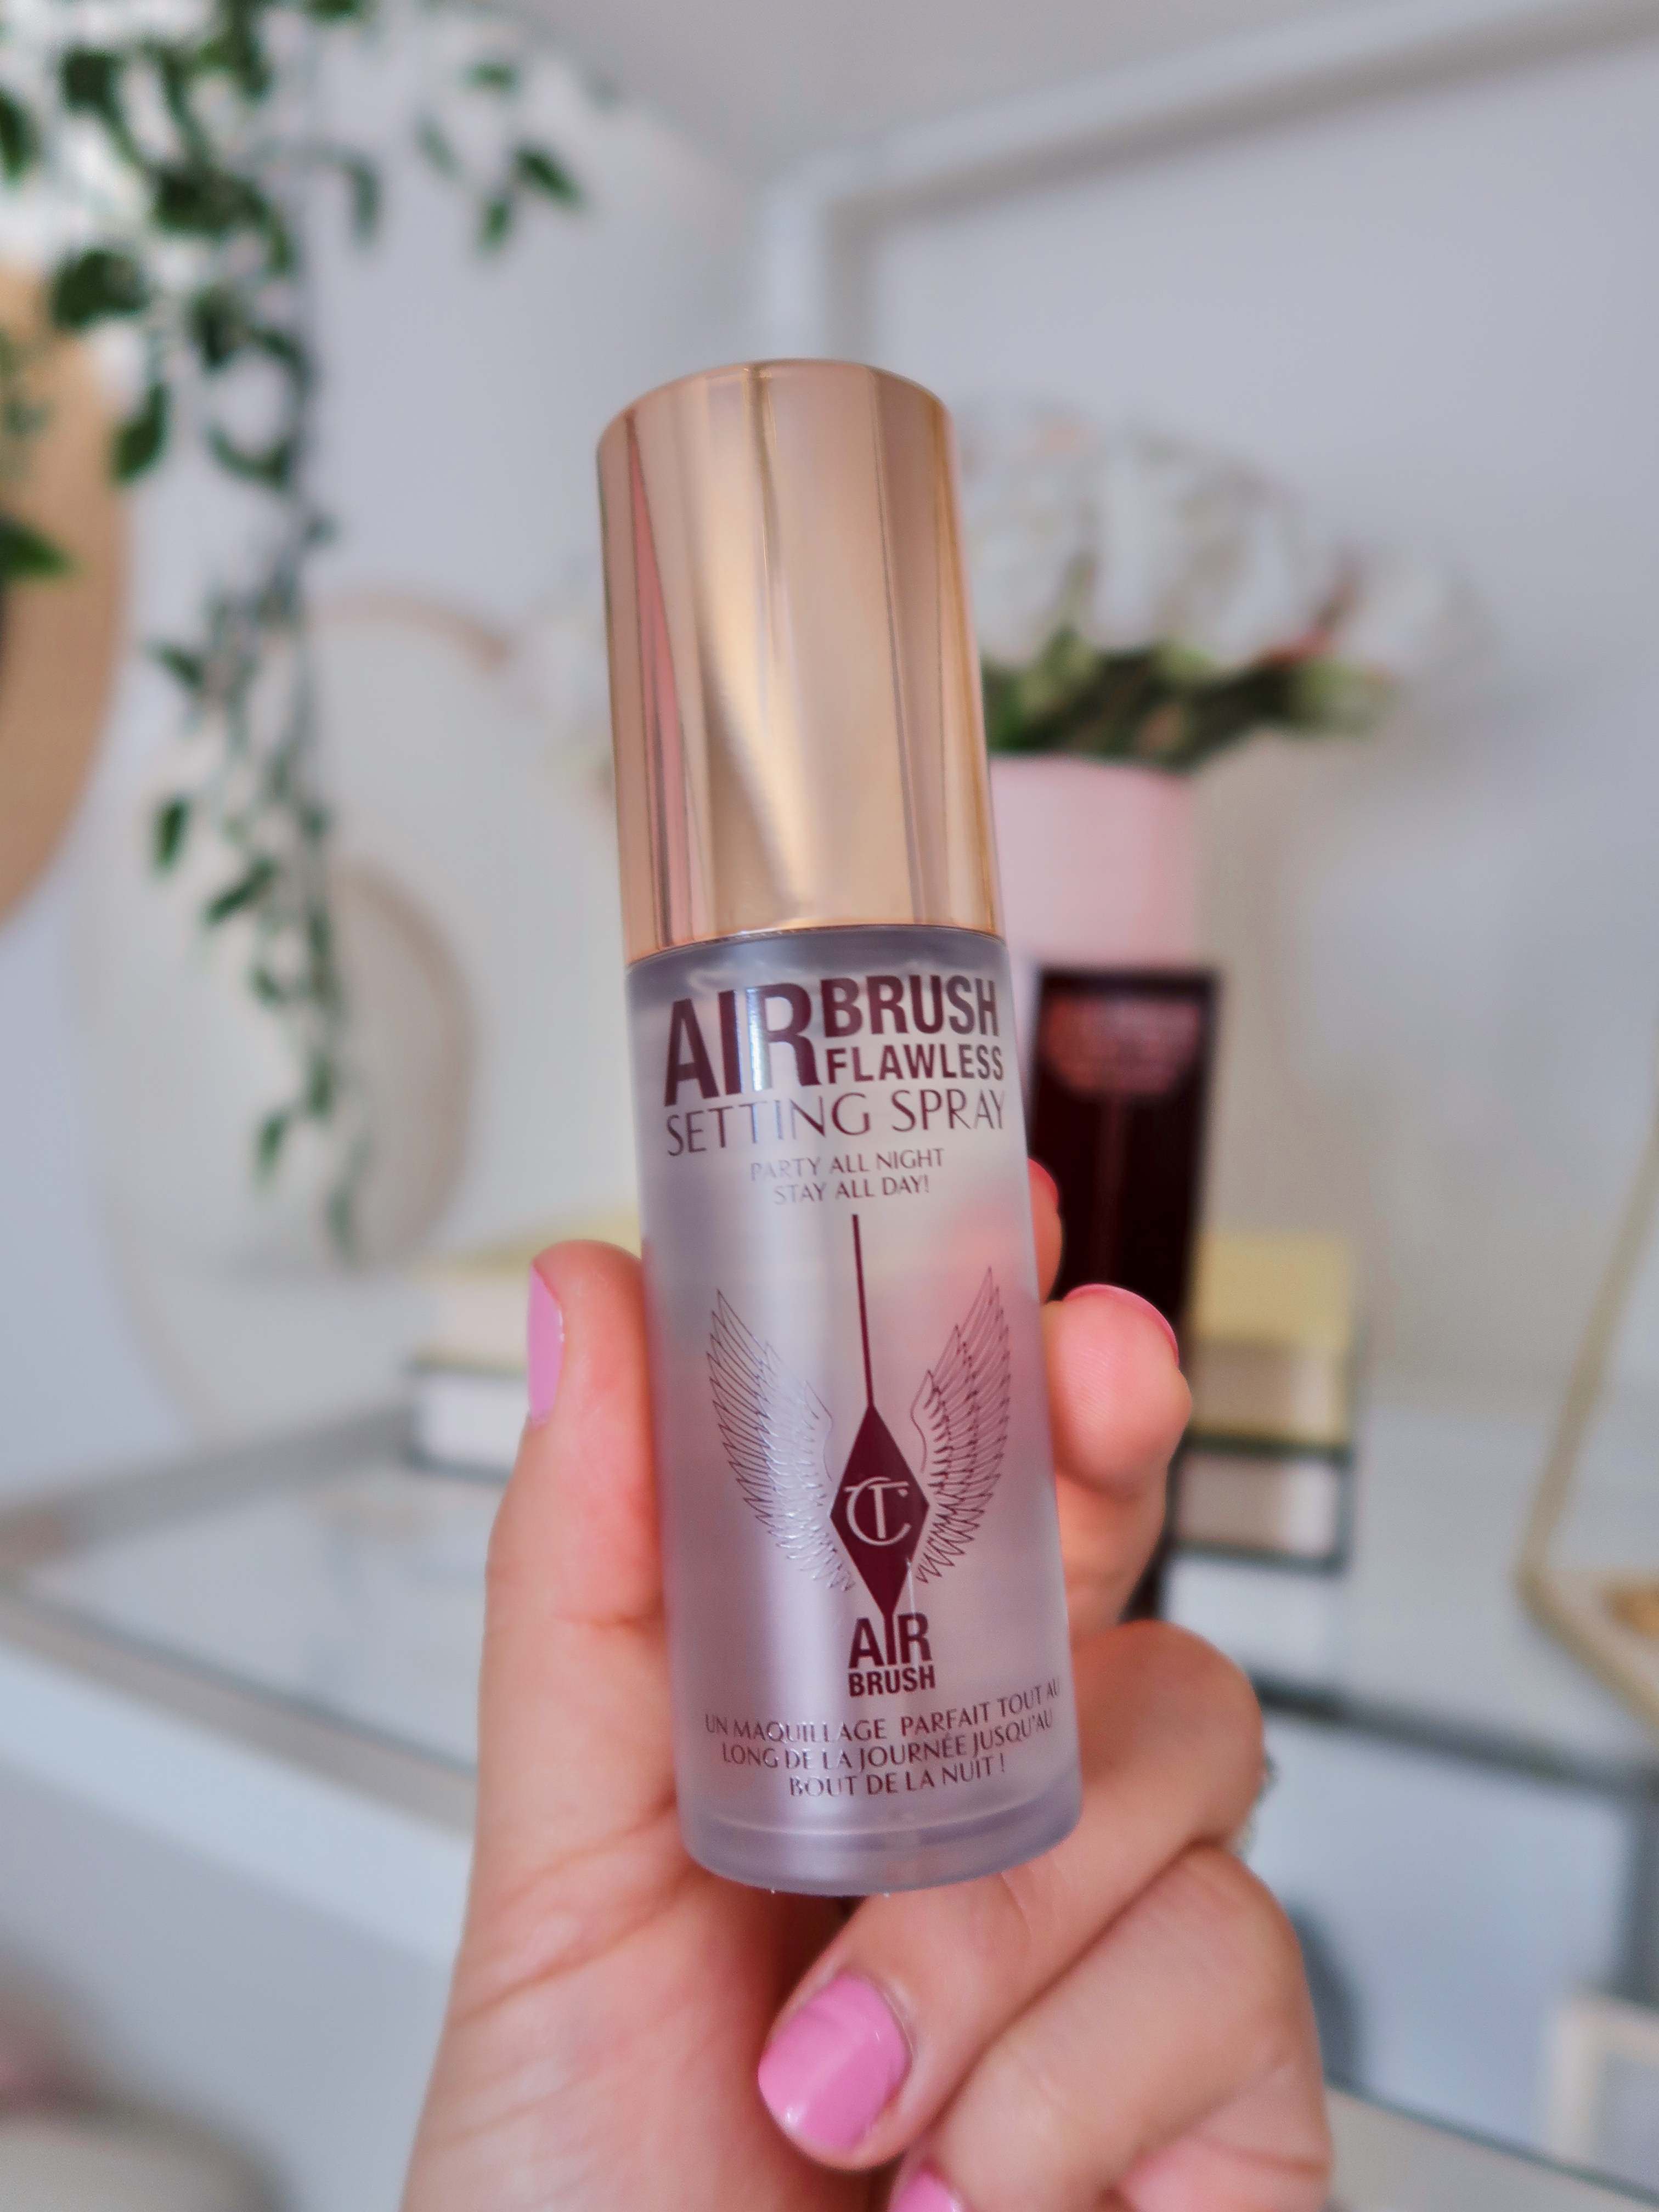 Charlotte Tilbury vs Urban Decay: Which make-up setting spray is best?